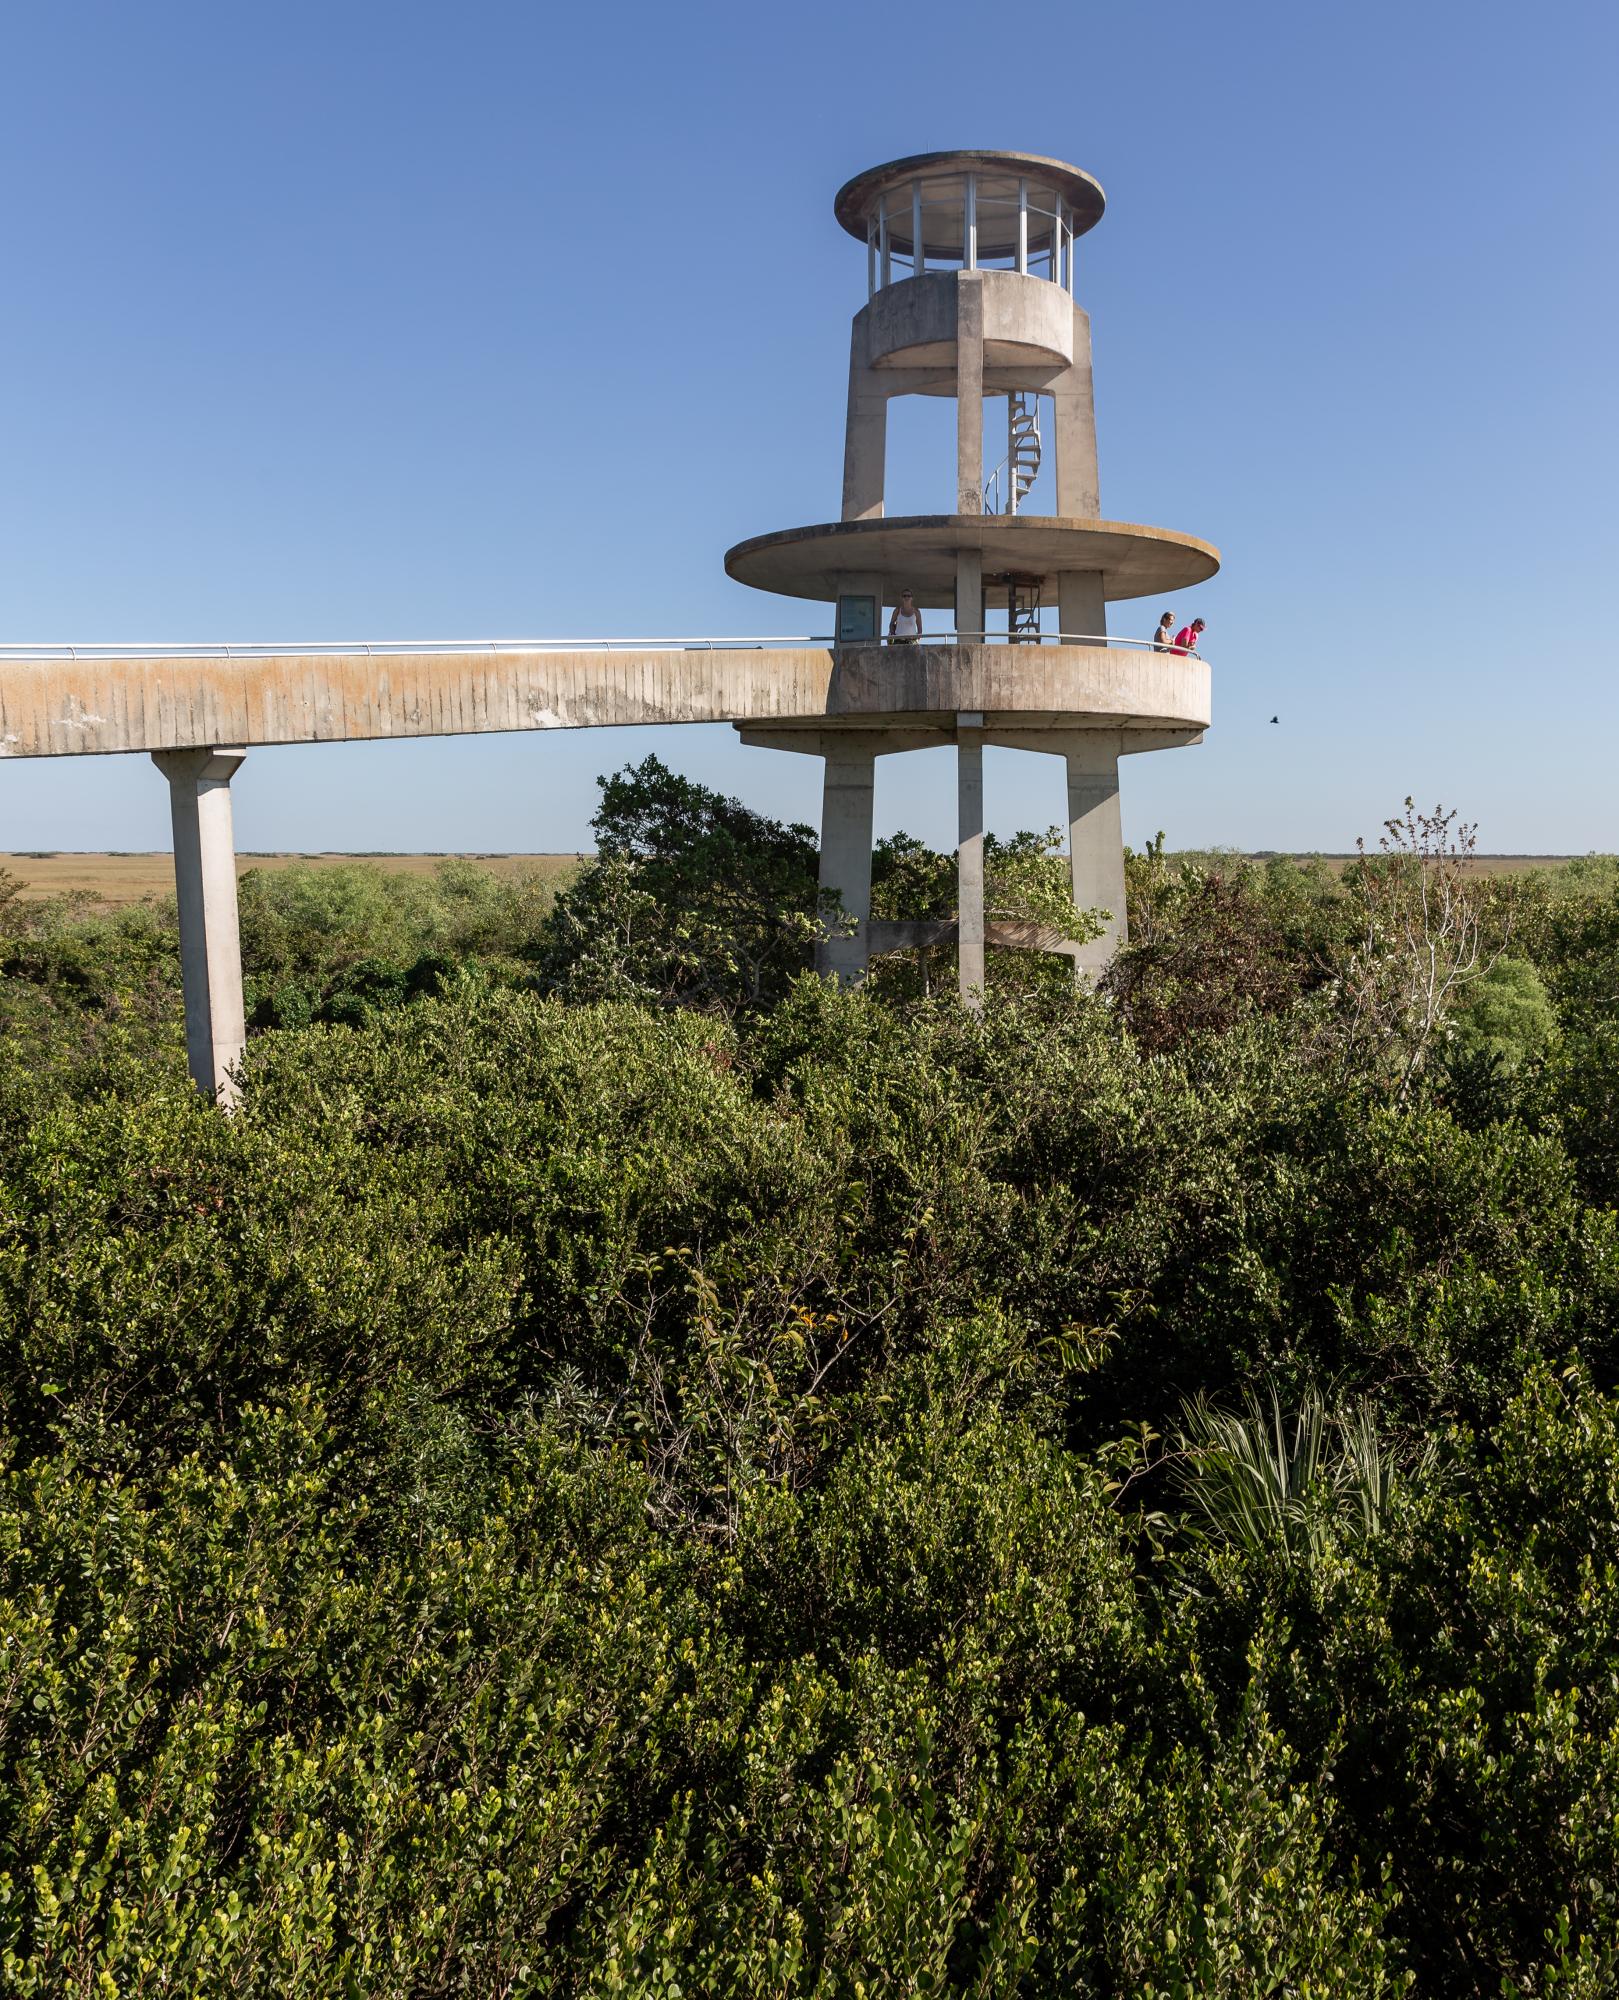 Connecting Concrete: Modernist Architecture from Havana to Miami - Shark Valley Observation Tower, 1964